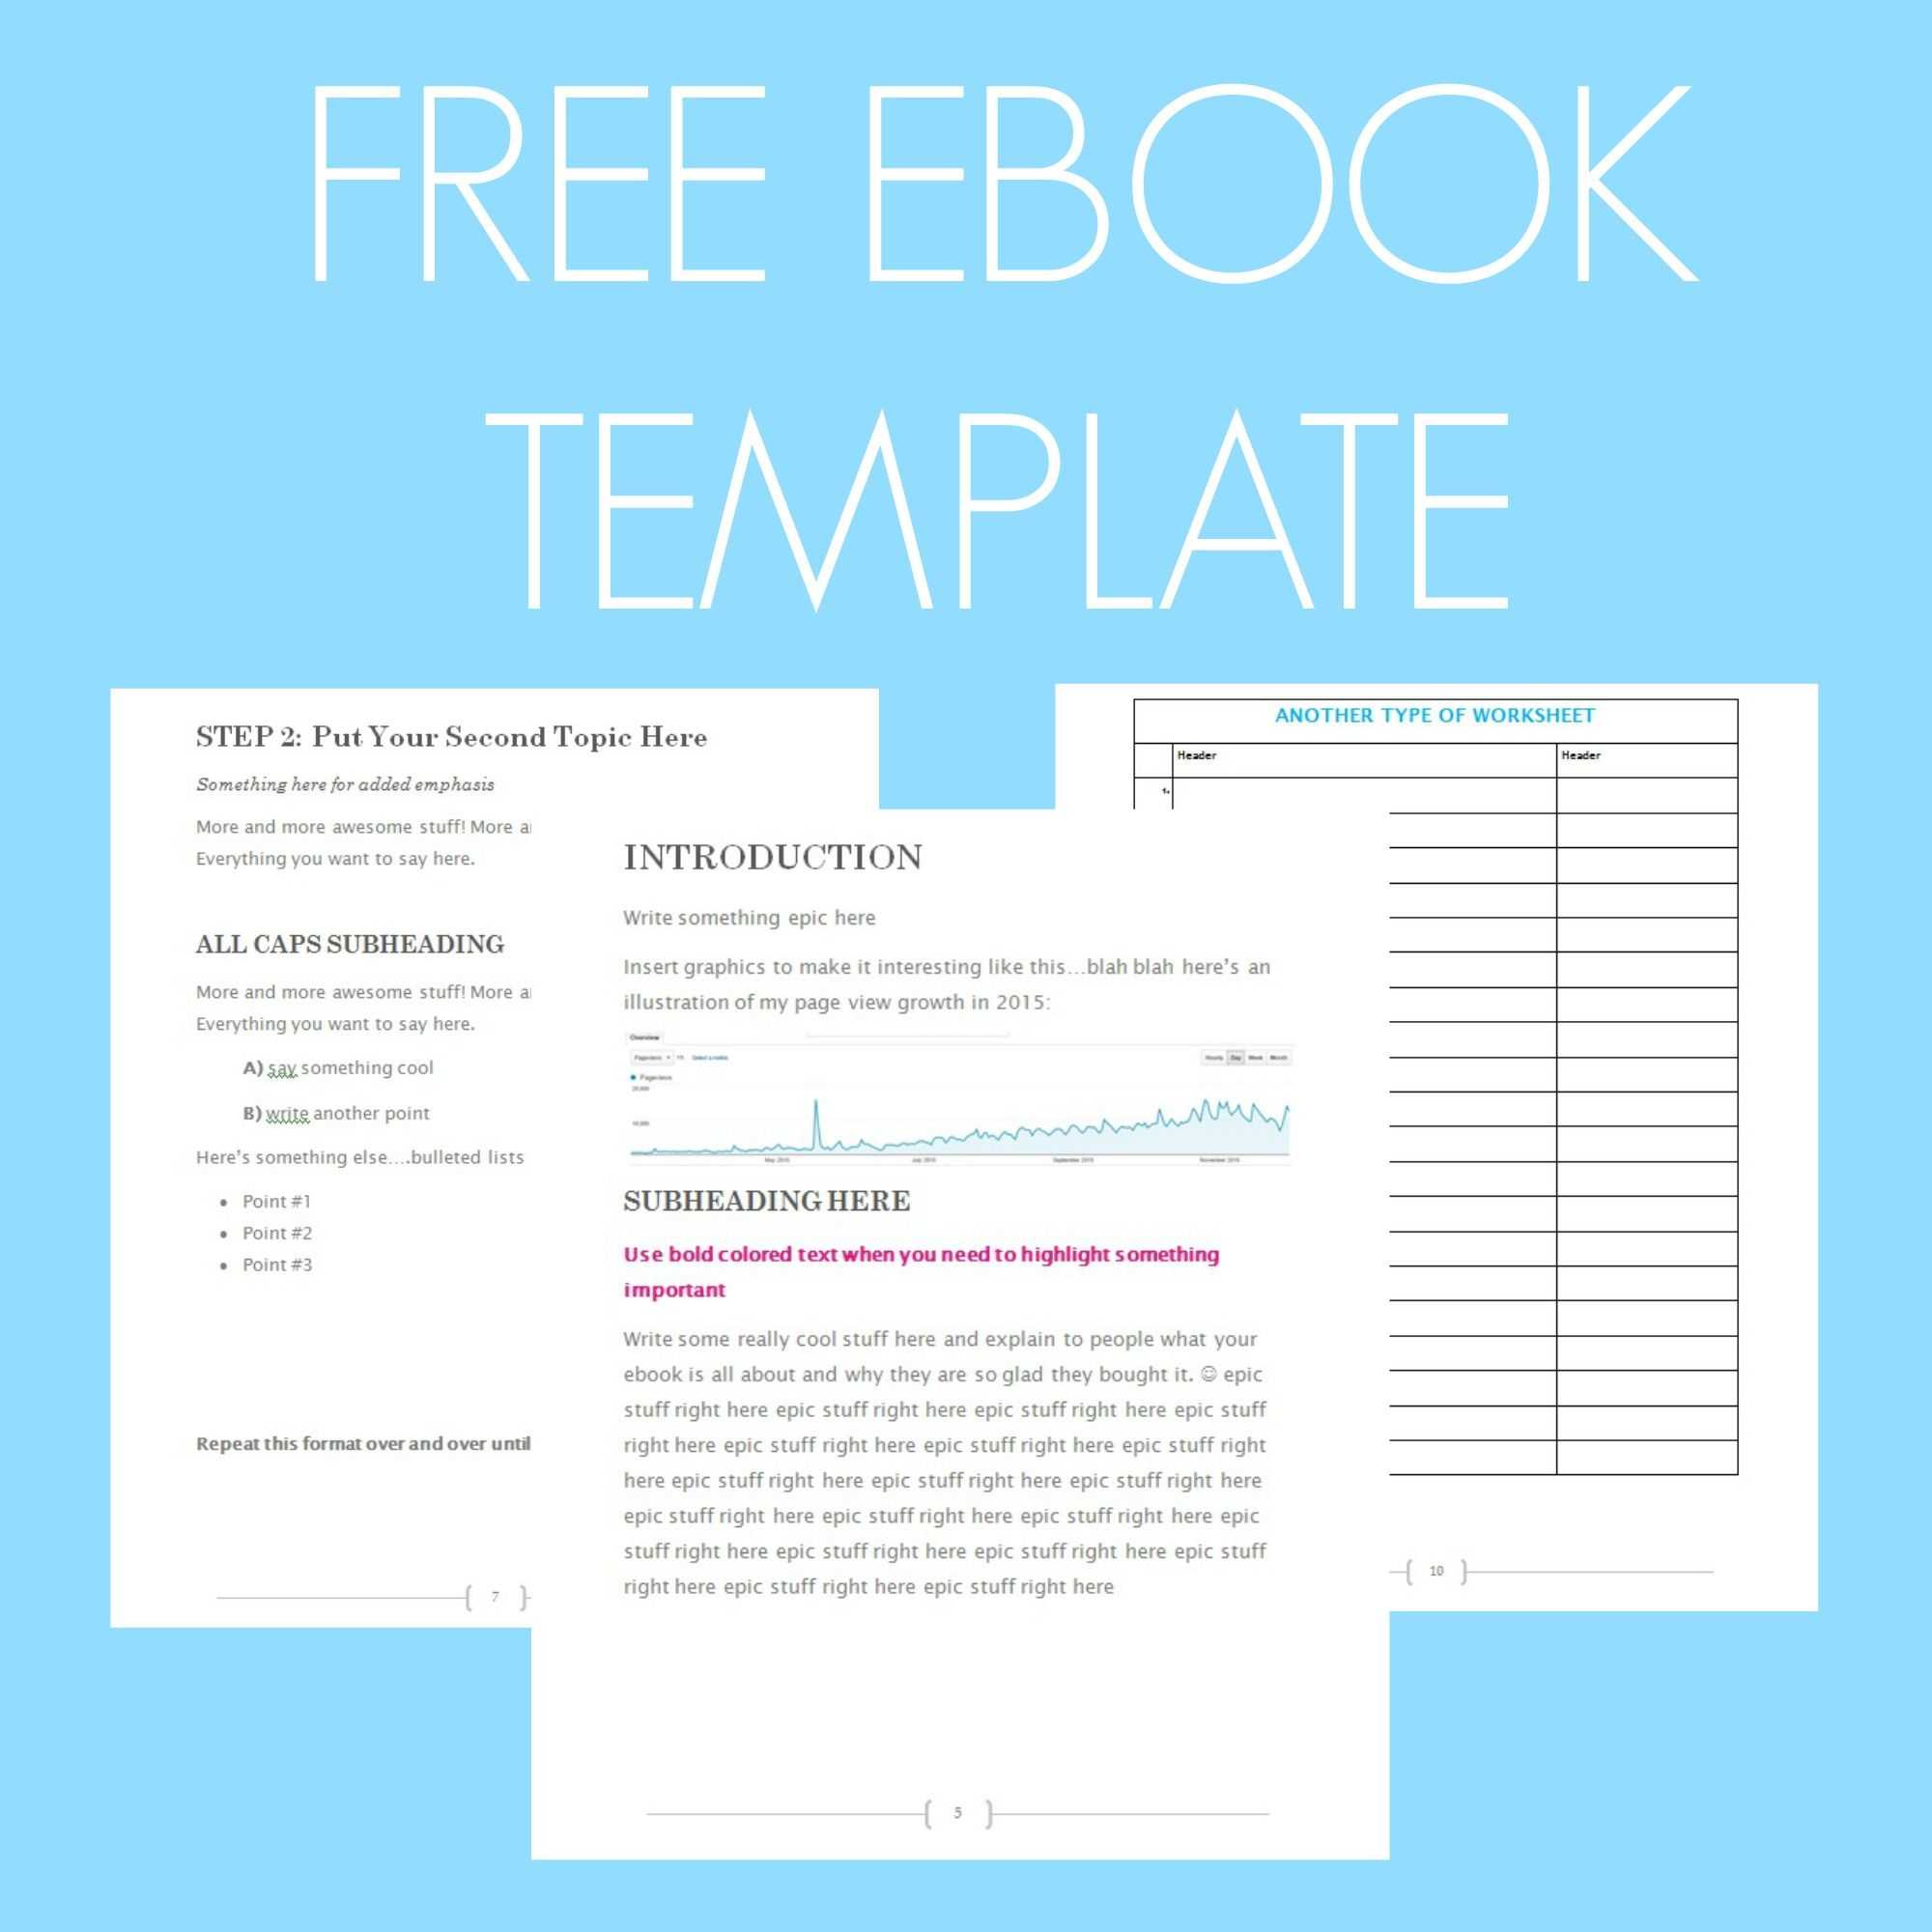 Free Ebook Template – Preformatted Word Document | Free Within Another Word For Template